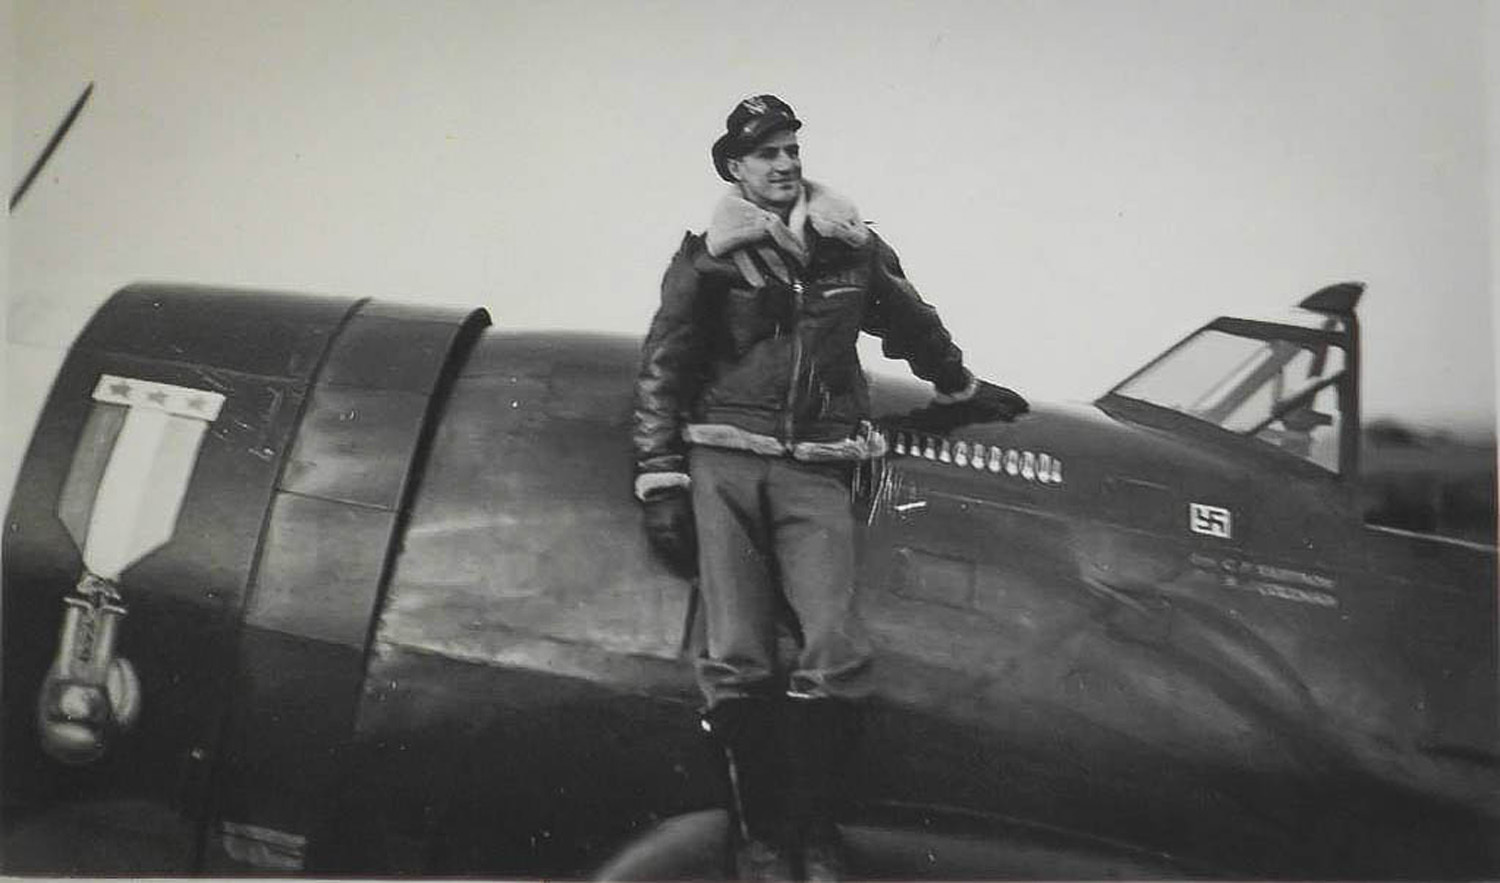 Capt. Carl Ekstrom poses with his battle tested P-47 Thunderbolt. Ekstrom was a two-time Golden Glove boxer which was signified by the distinct mural on his aircraft. Ekstrom was shot down over France while piloting a P-47 Thunderbolt following a bomber escort mission. (Courtesy Photo)